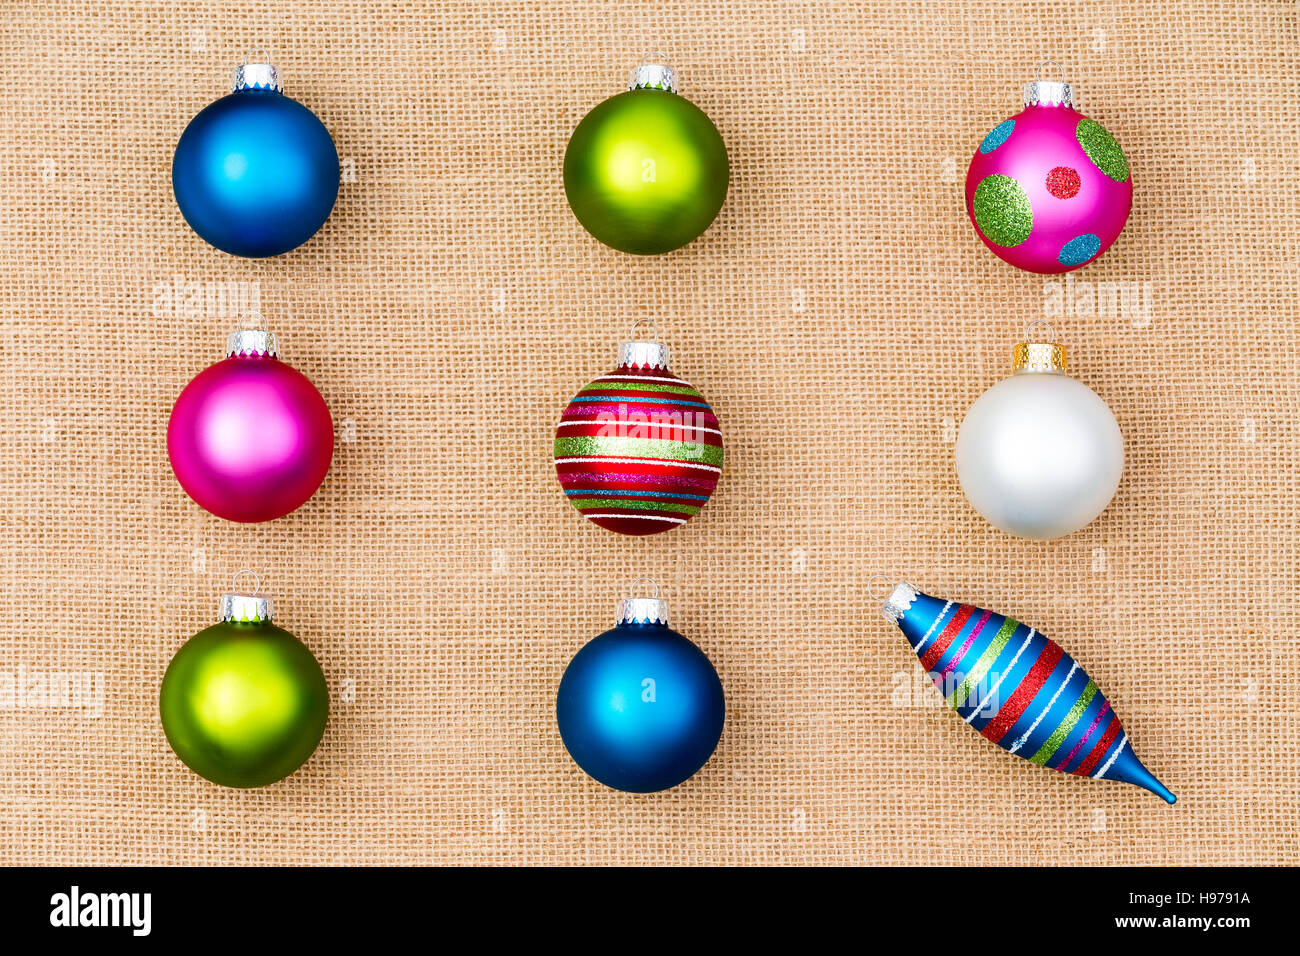 Festive Christmas still life with colorful Xmas tree ornaments arranged in neat rows of baubles with a single spindle conceptual of individualism and Stock Photo